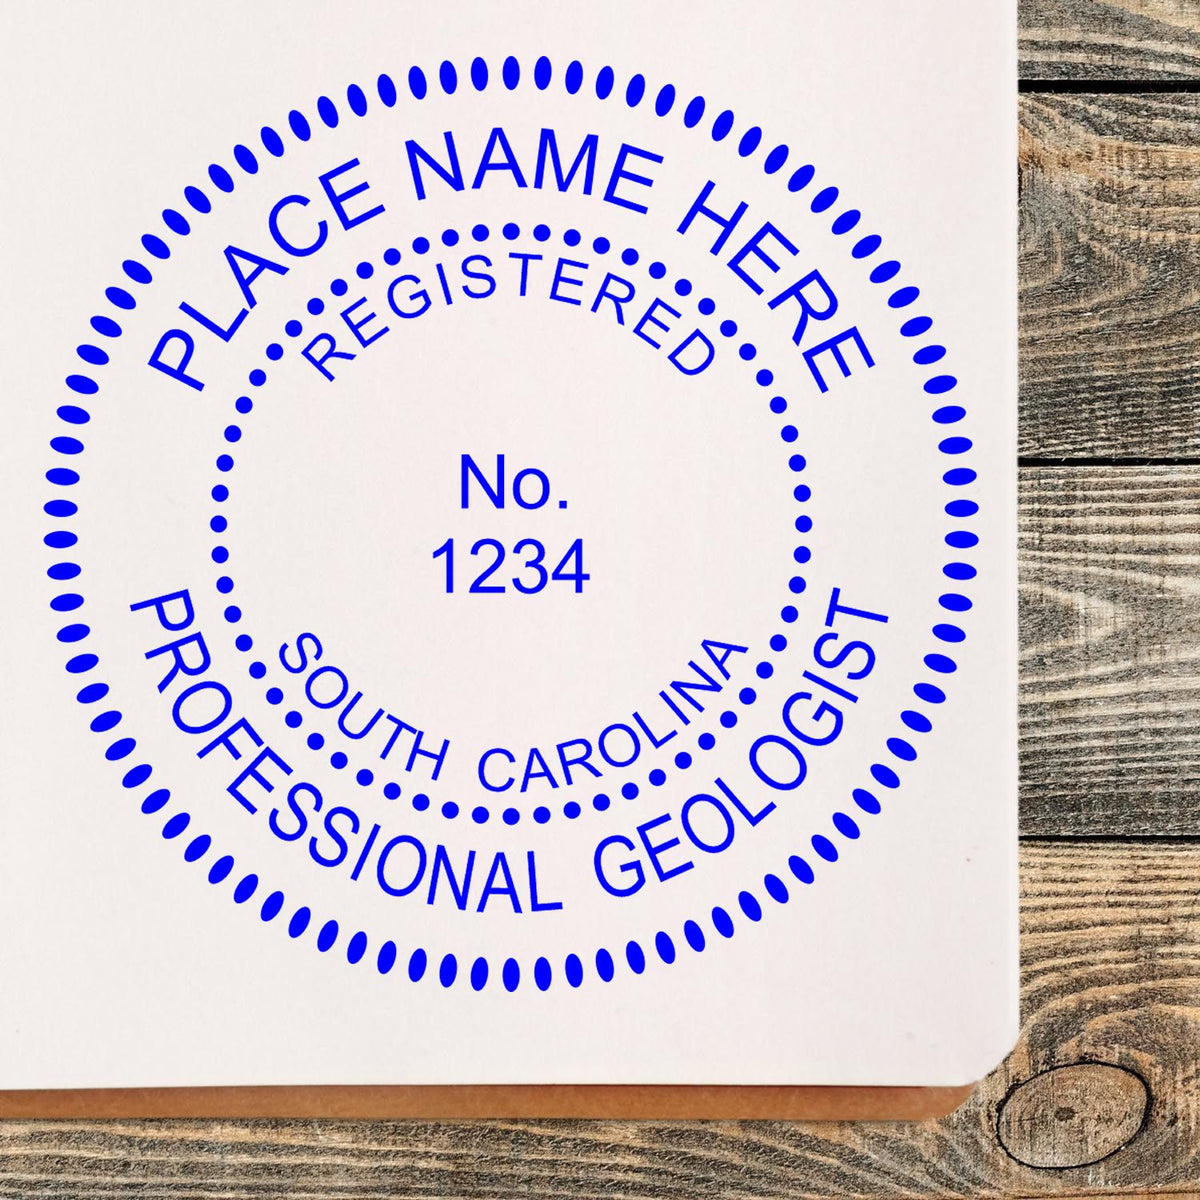 This paper is stamped with a sample imprint of the Self-Inking South Carolina Geologist Stamp, signifying its quality and reliability.